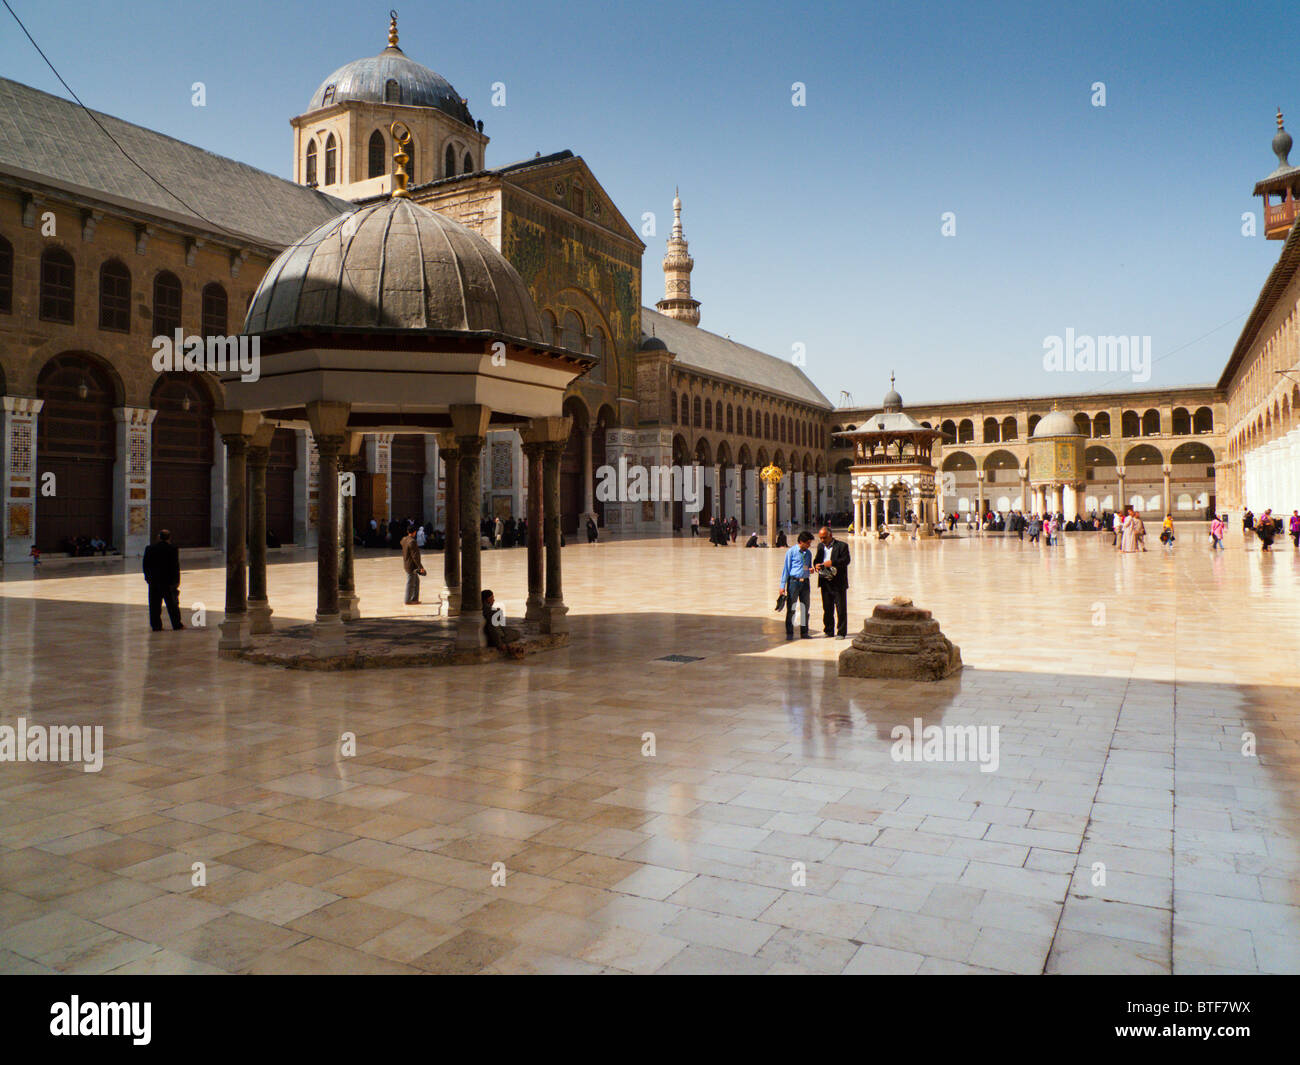 Ummayad Mosque Completed In 715AD Also Known As The Grand Mosque of Damascus, Damascus Syria The Middle East Stock Photo